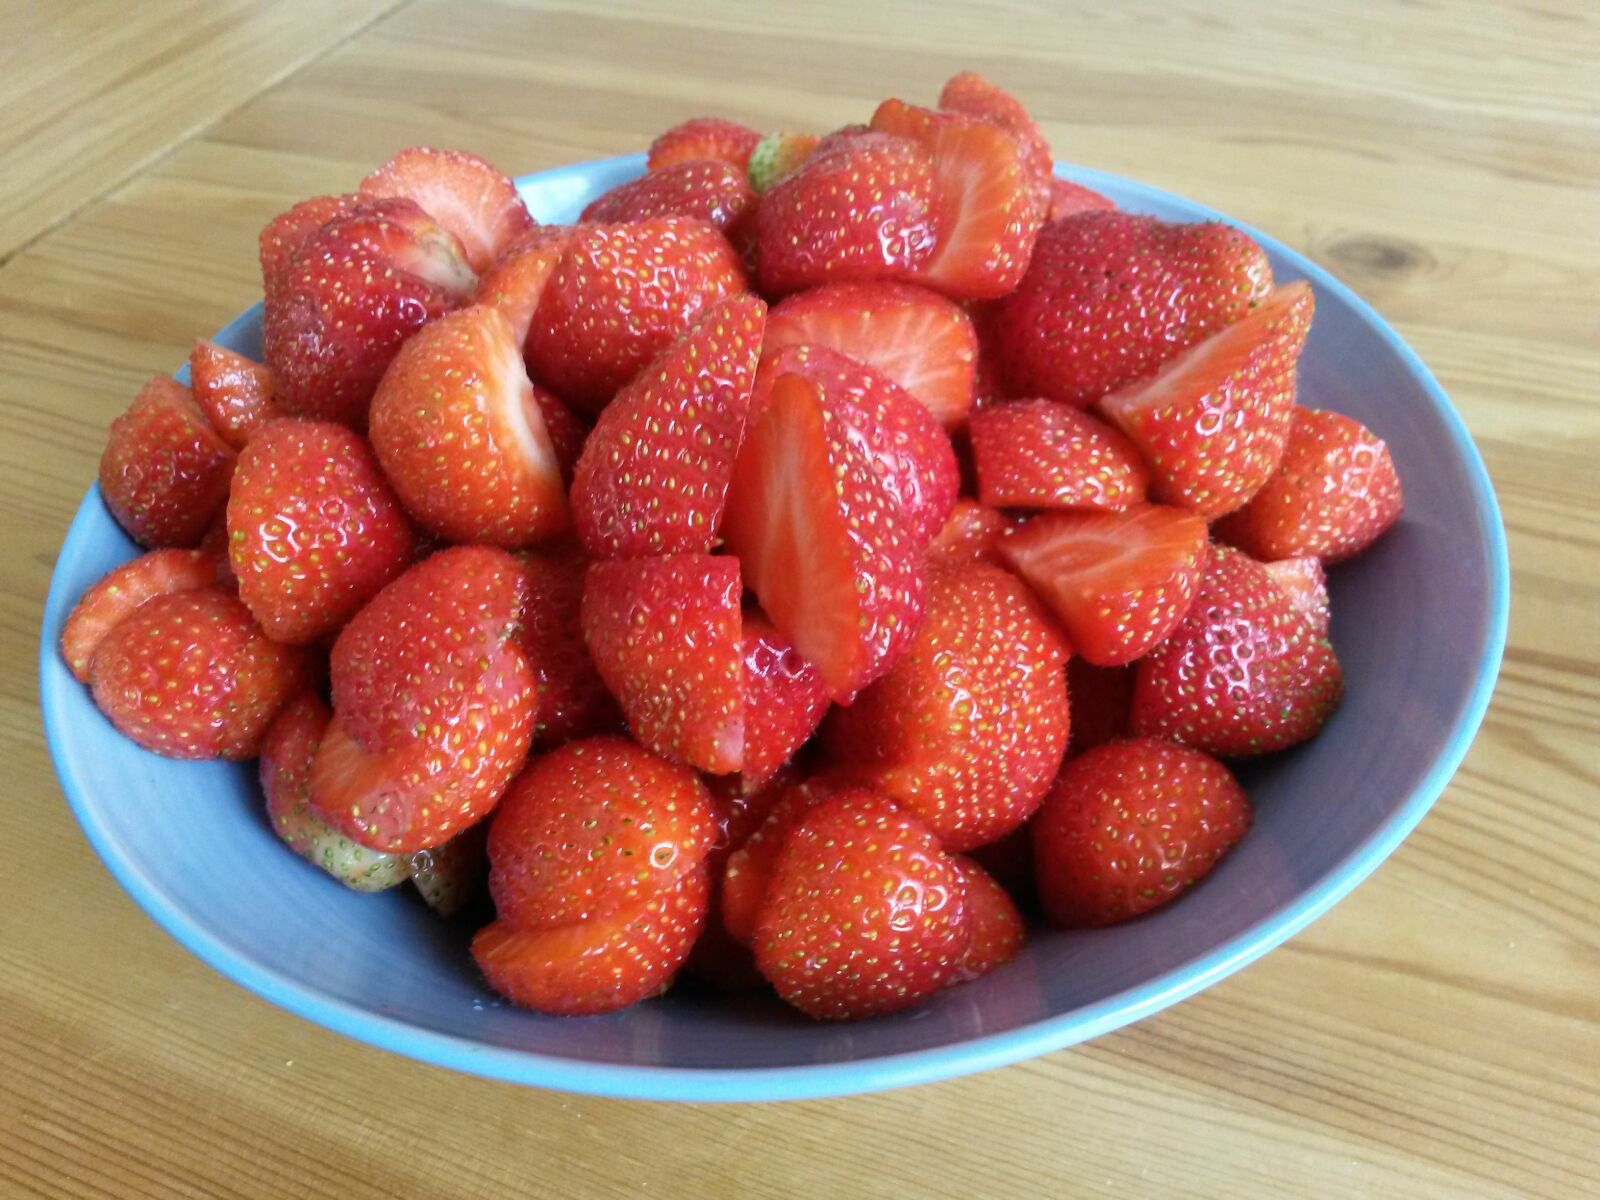 Samsung Galaxy S4 Mini sample photo. Strawberries, plate, red photography